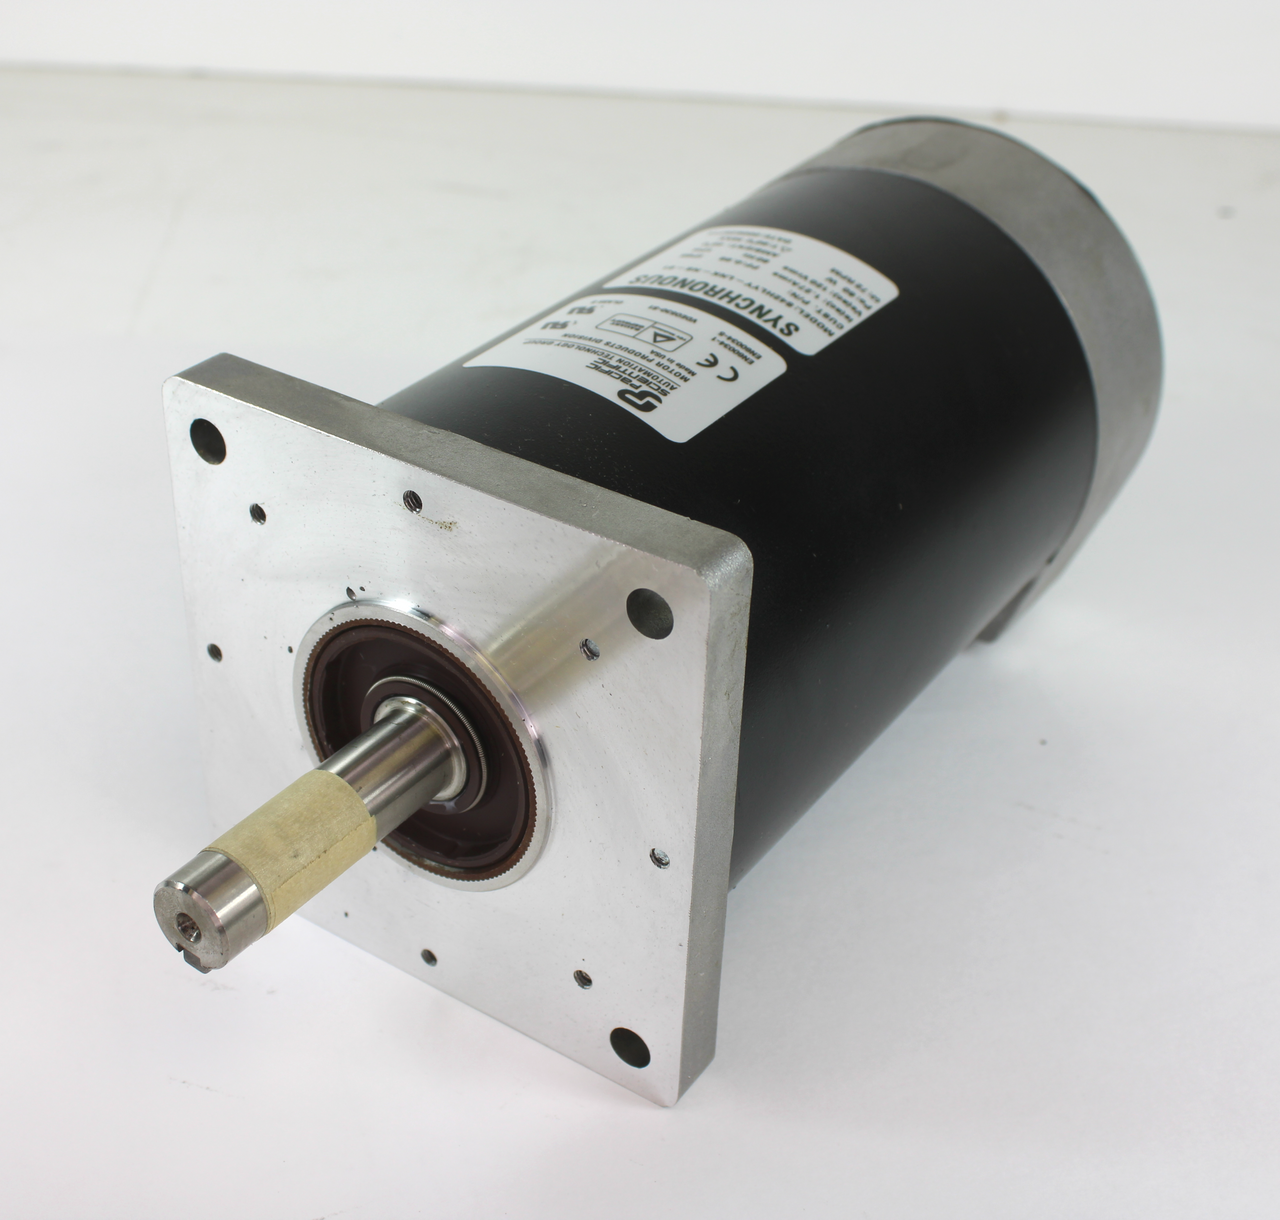 Pacific Scientific S42HLYY-LNK-NS-01 Synchronous Motor 60W 72 RPM 120Vrms New